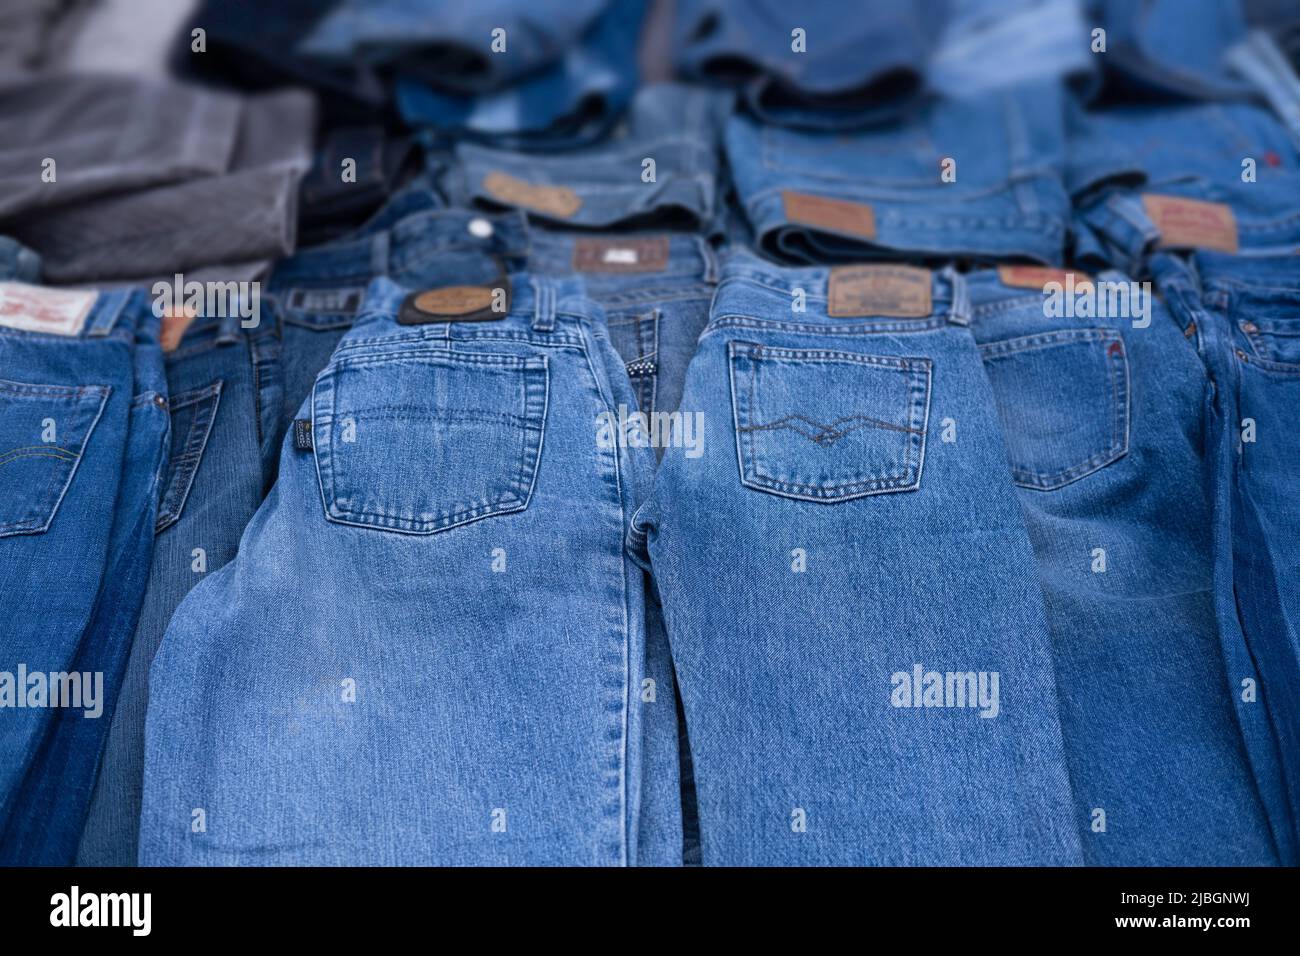 Jeans are displayed in a market stall. Focus on the pockets on the pants, the brands are blurred. Background image Stock Photo